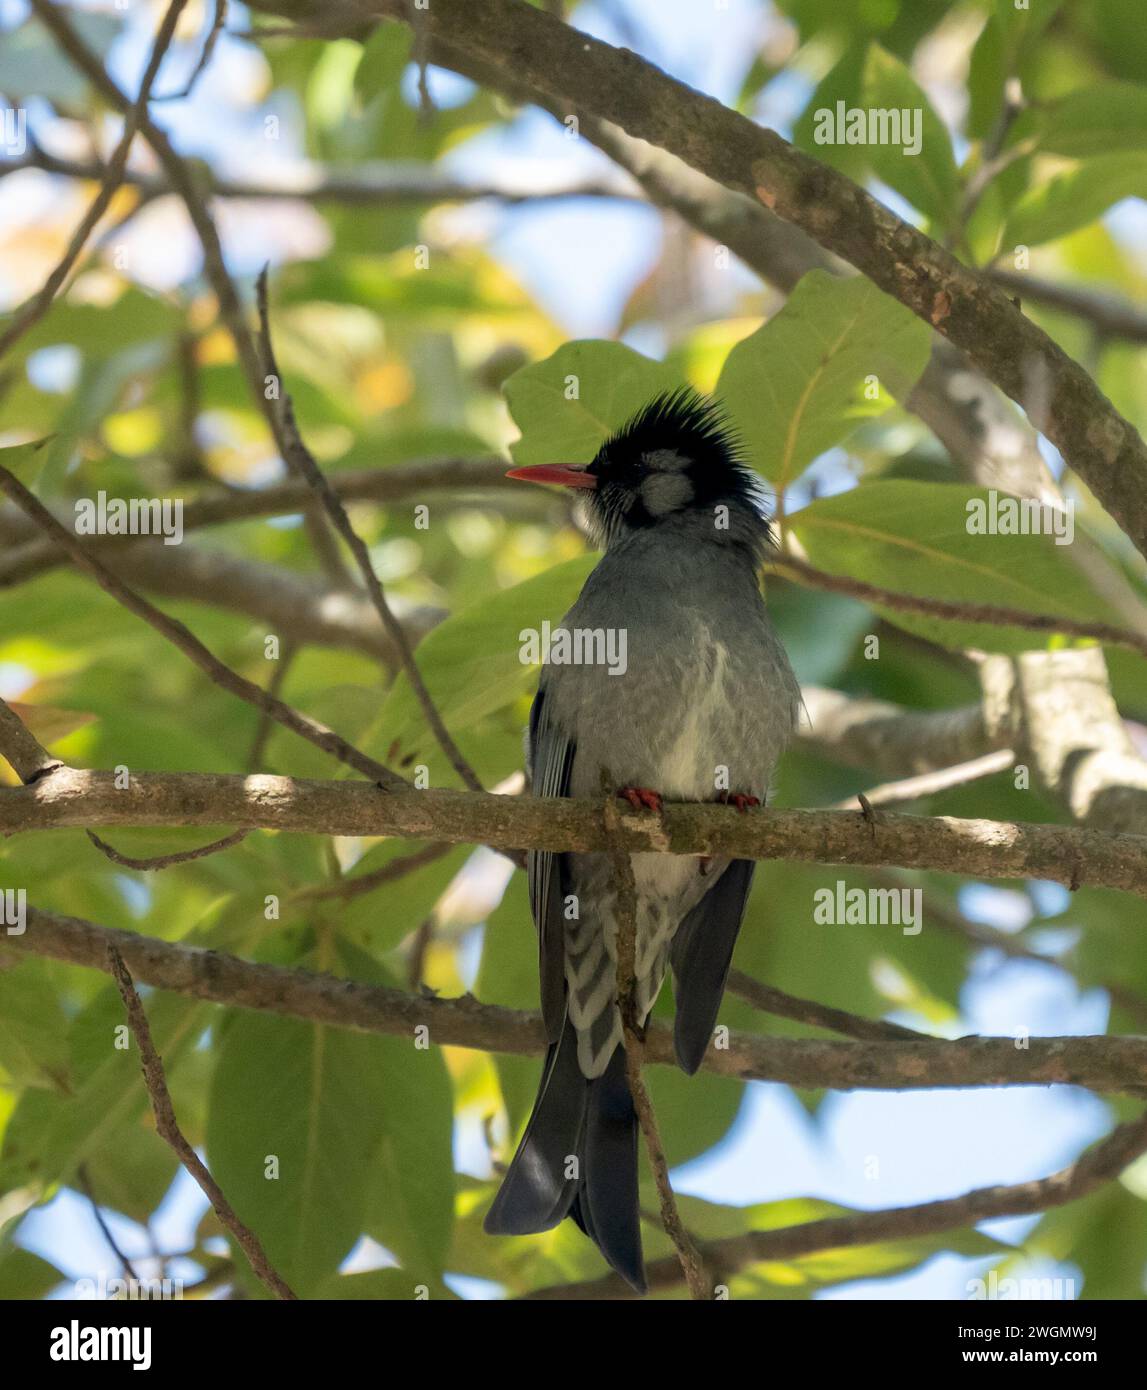 A Black Bulbul Perched in a Tree. Stock Photo